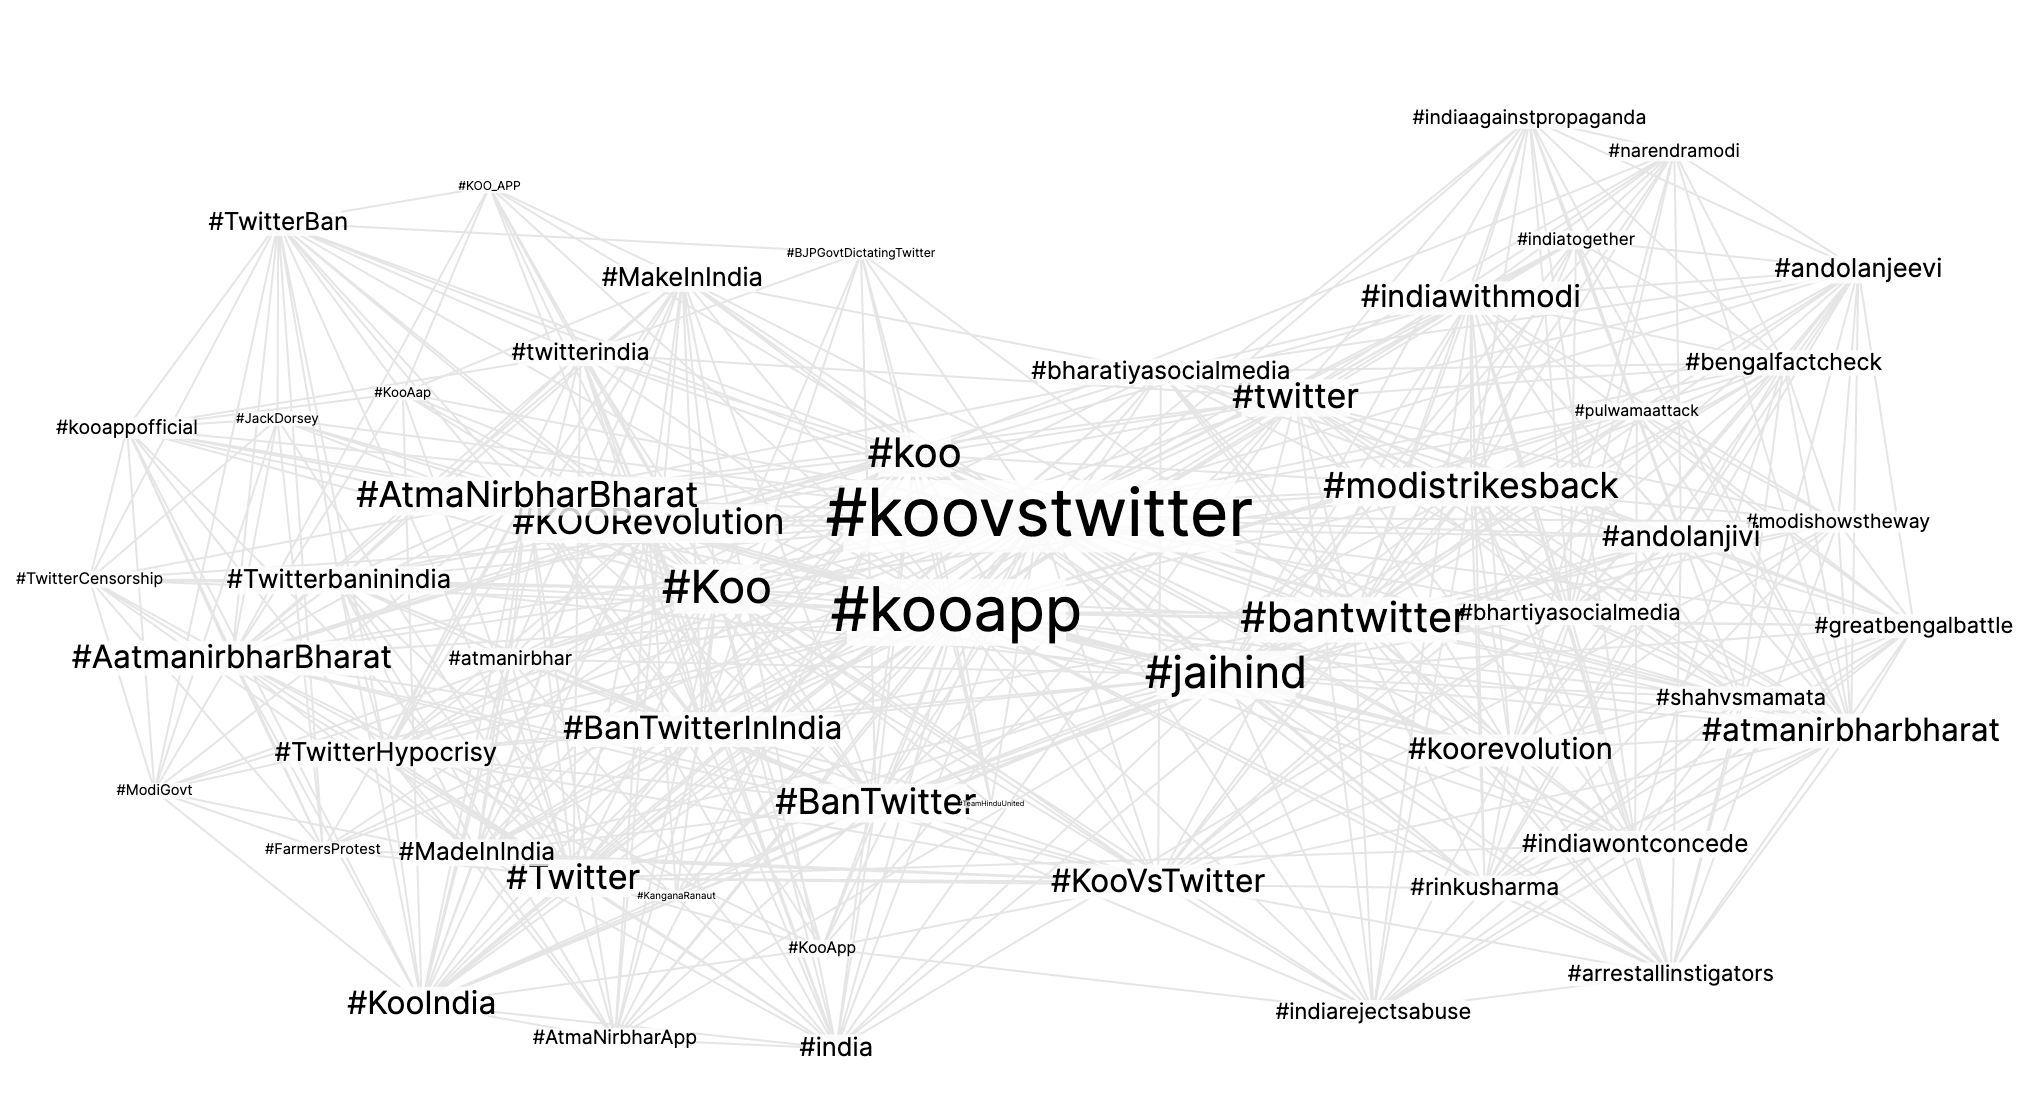 Figure 4: Hashtag co-occurrence network for Koo related hashtags trending on Twitter where there is a link between two nodes (hashtags) if they appear in the same tweet. The sample contains 5014 tweets between 8th and 15th February, taking only tweets from popular accounts (having more than 5000 followers) and only those hashtags that appeared in at least 100 tweets are used in the visualization. The bigger nodes represent the hashtags which were used more frequently. [3]